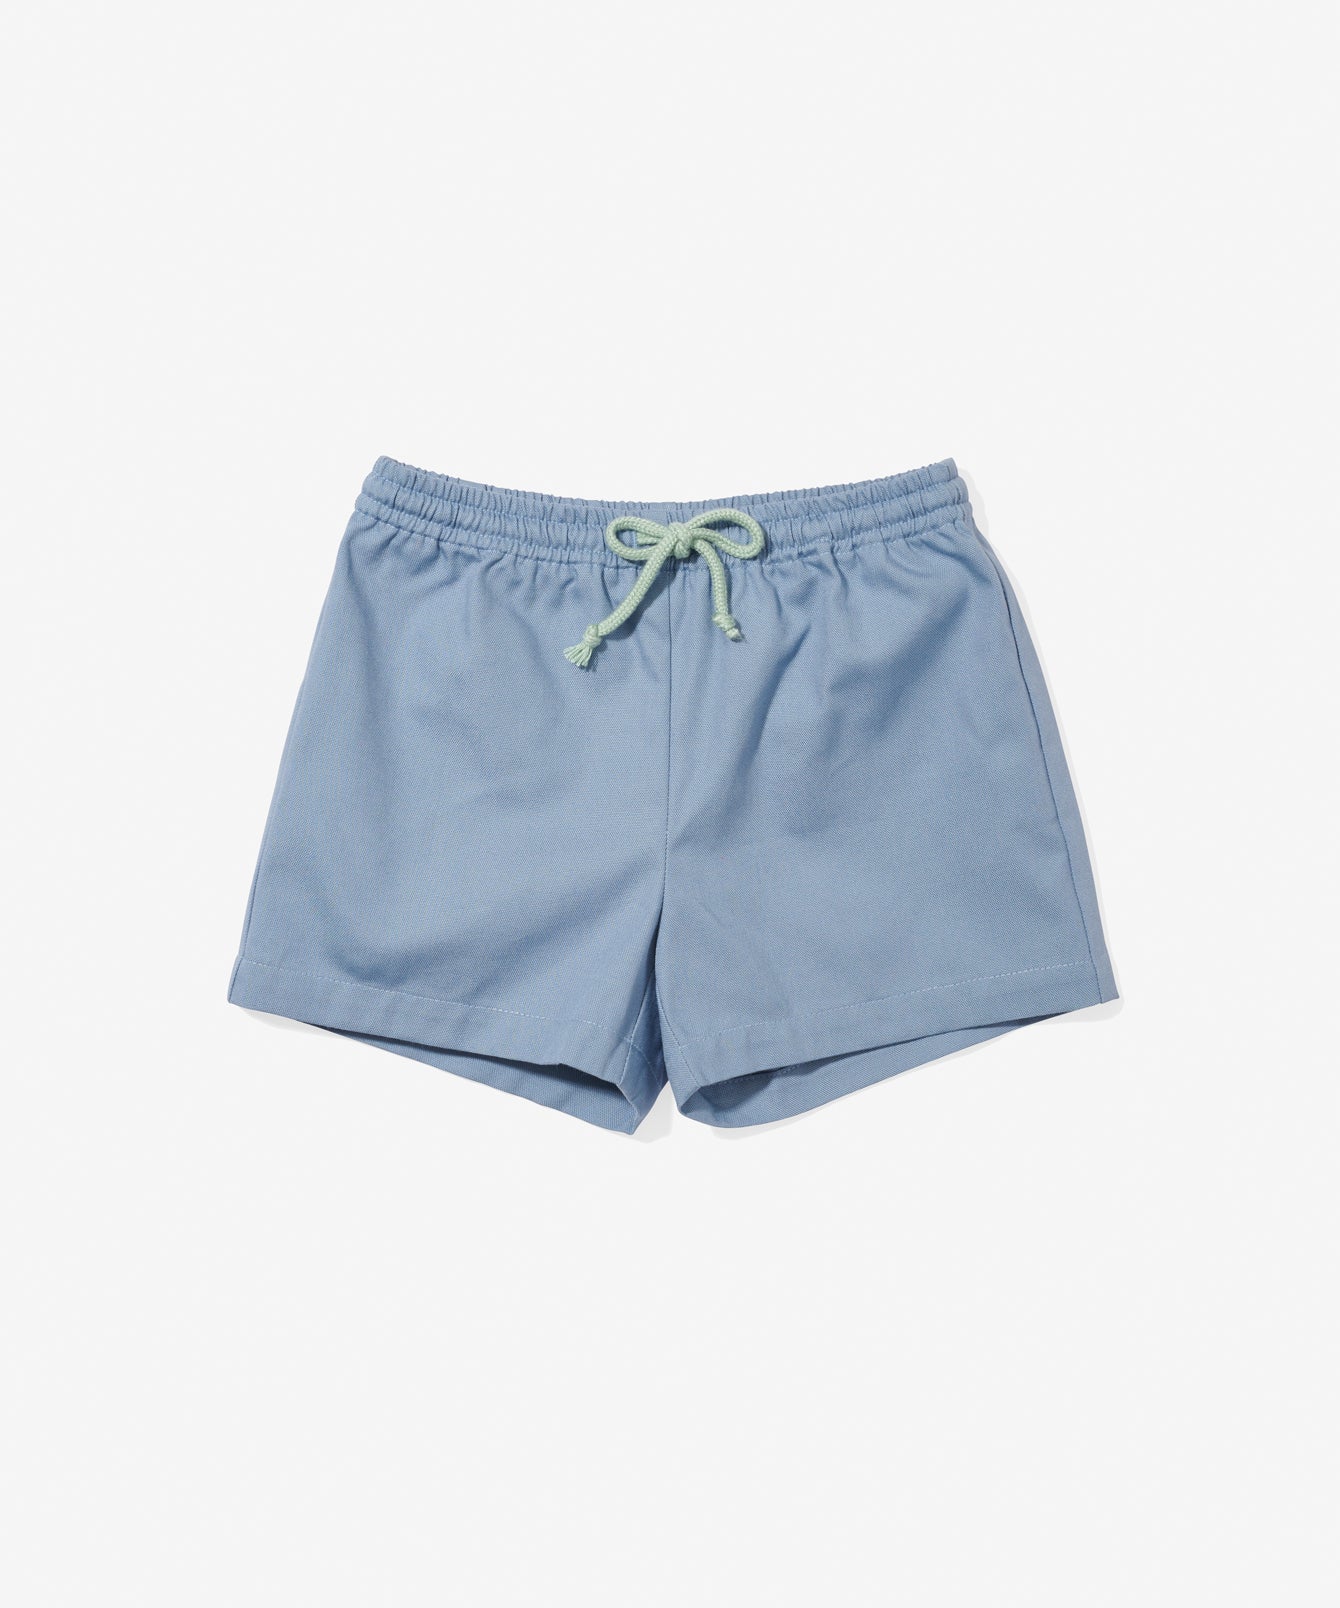 Girls and Boys summer short in Dusty Blue | Oso and Me – Oso & Me